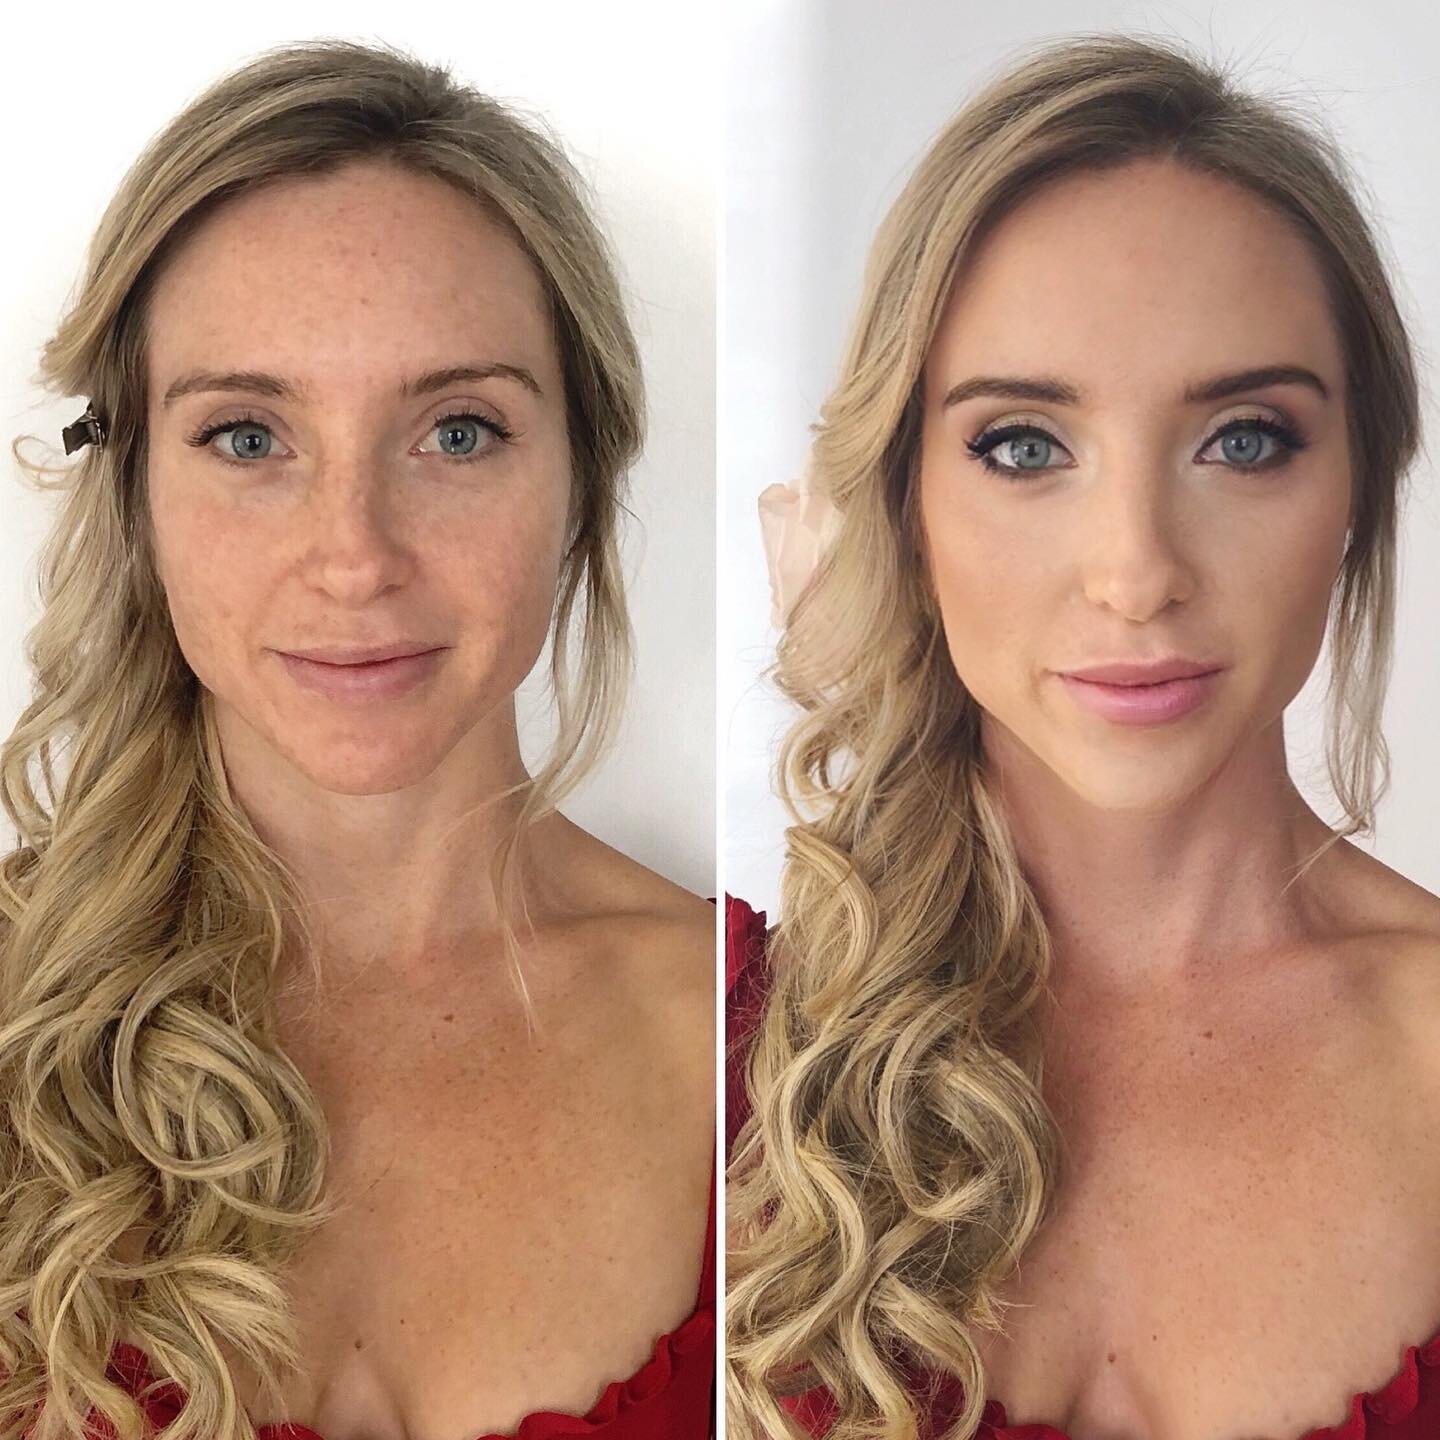 It&rsquo;s been a while since we&rsquo;ve shared a before and after! Subtle makeup &amp; romantic hair for the win. @beautyasylum_charlotte #beautyasylum @jessicalyness_hamu #beautyasylum_jessica #beforeandaftermakeup #yestemptu